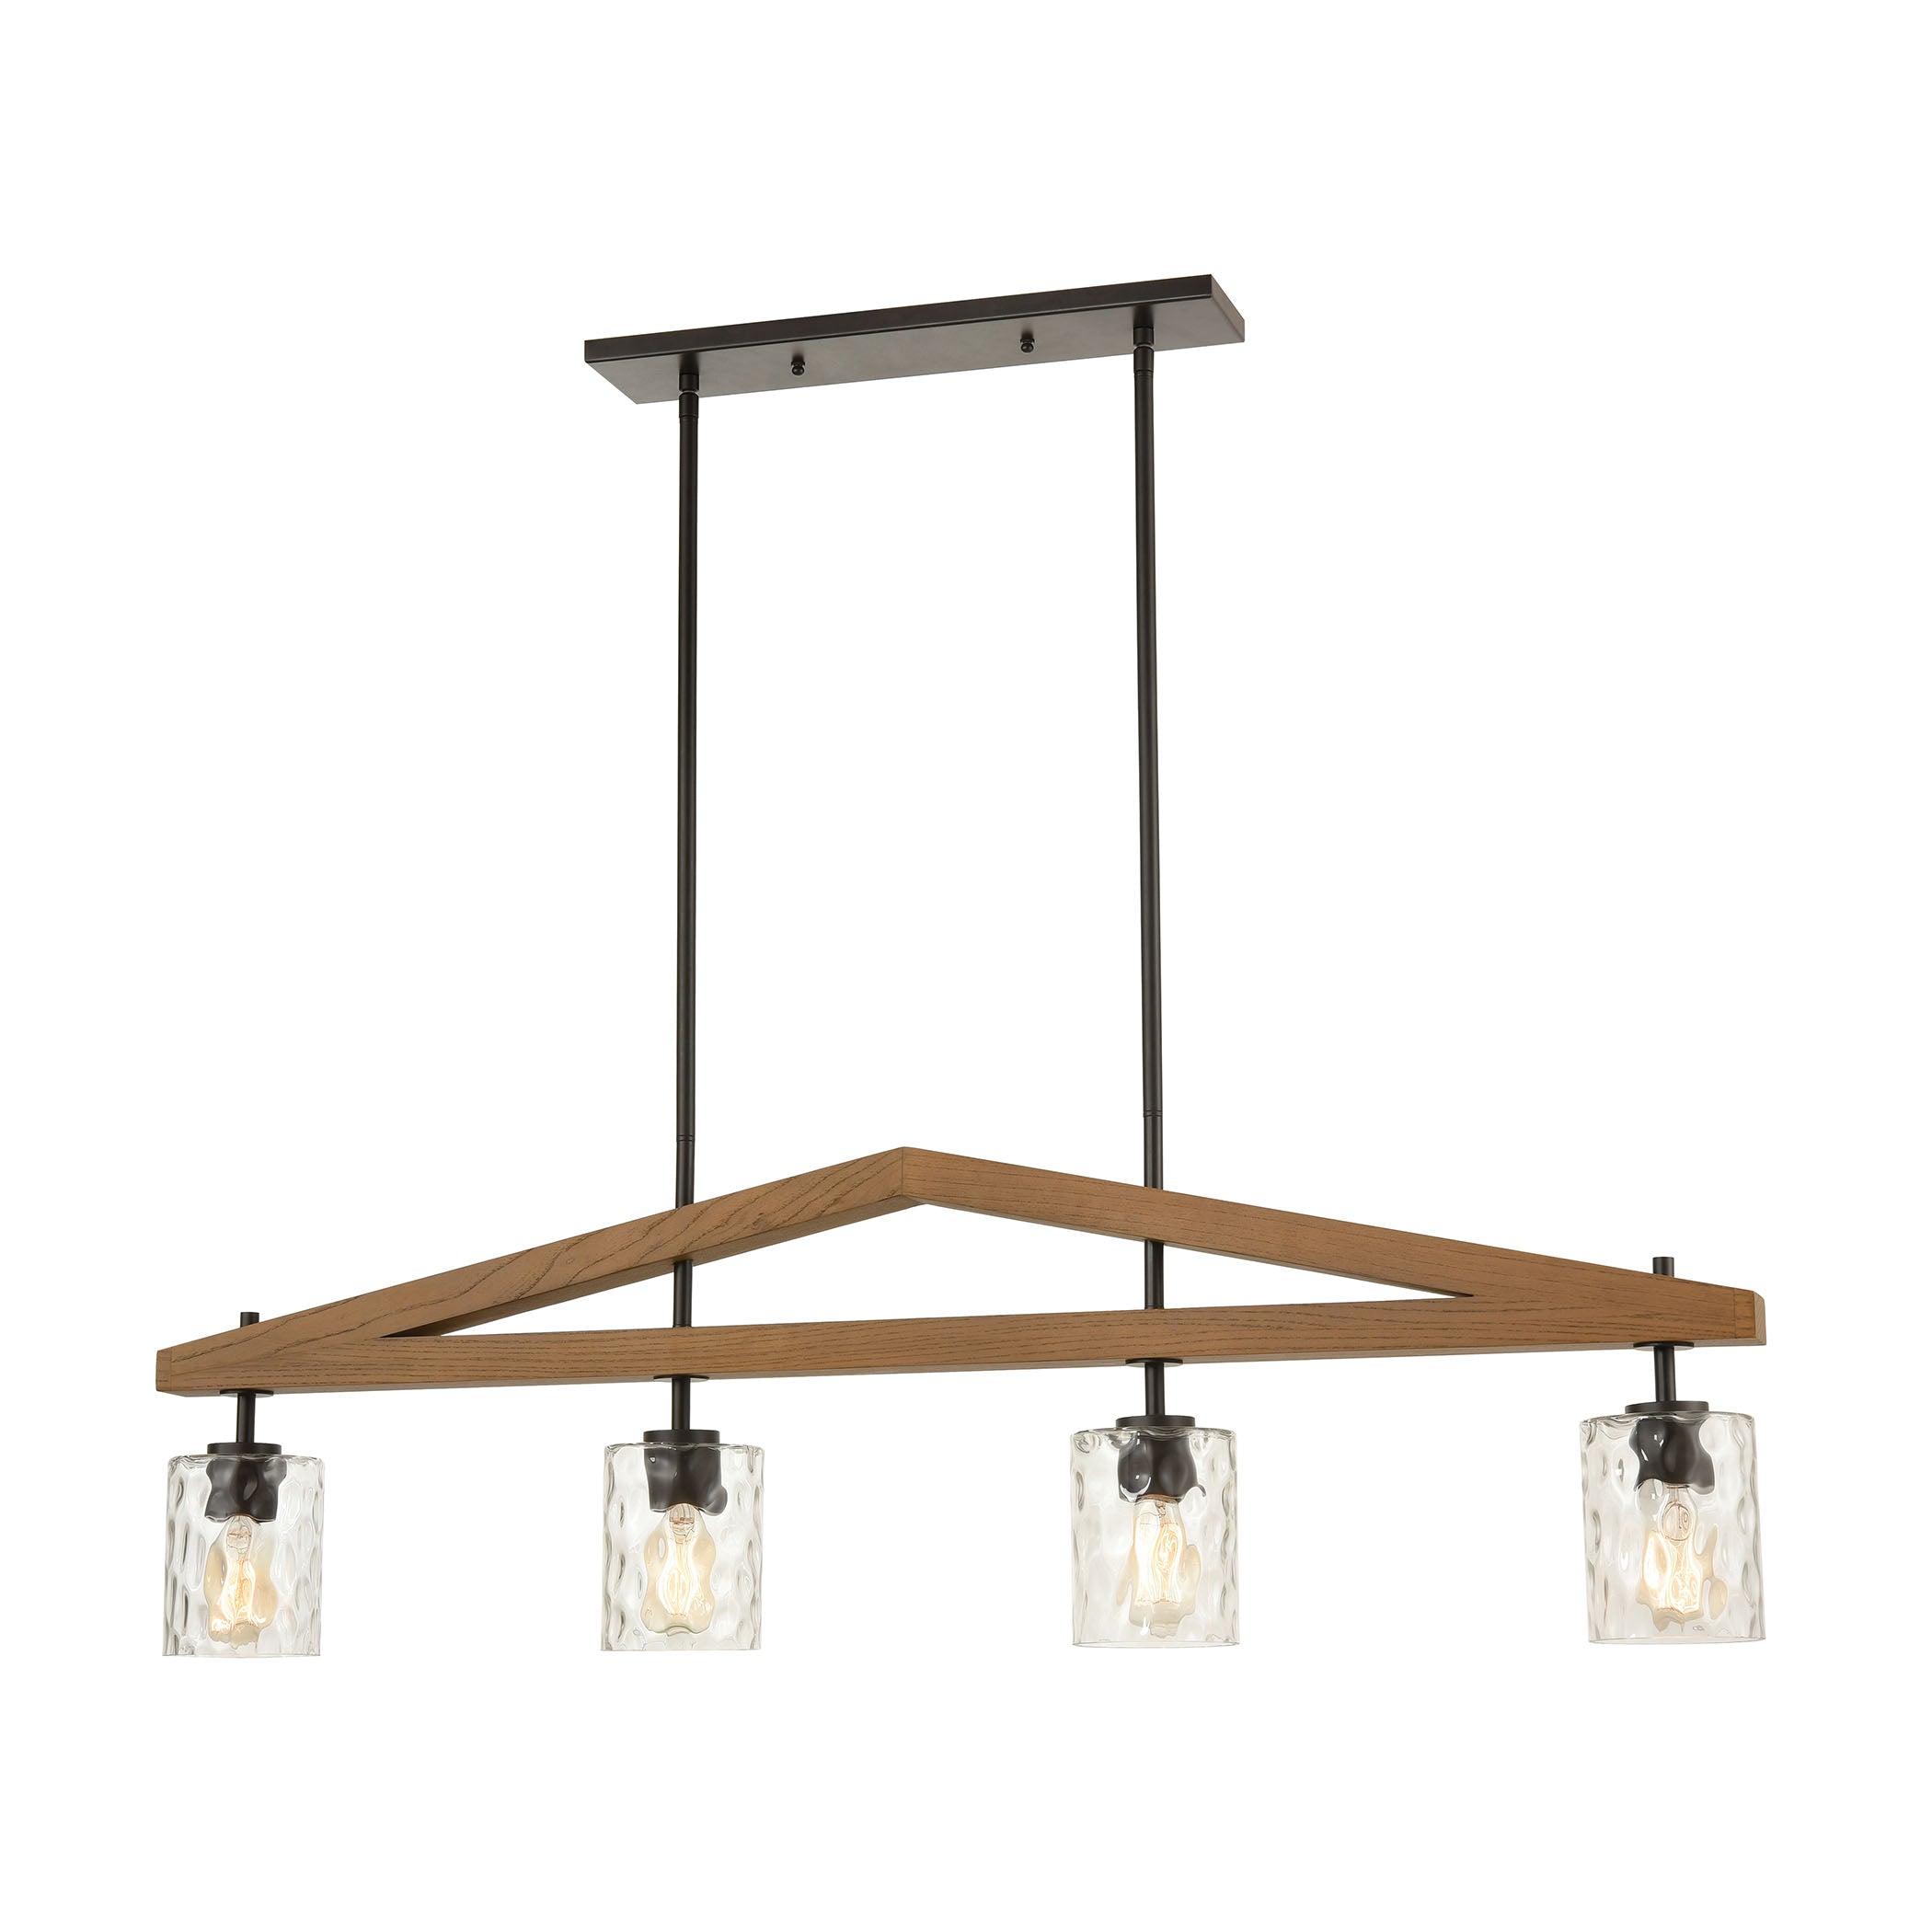 ELK Lighting 33305/4 A-Frame 4-Light Island Light in Oil Rubbed Bronze and Medium Oak with Water Glass